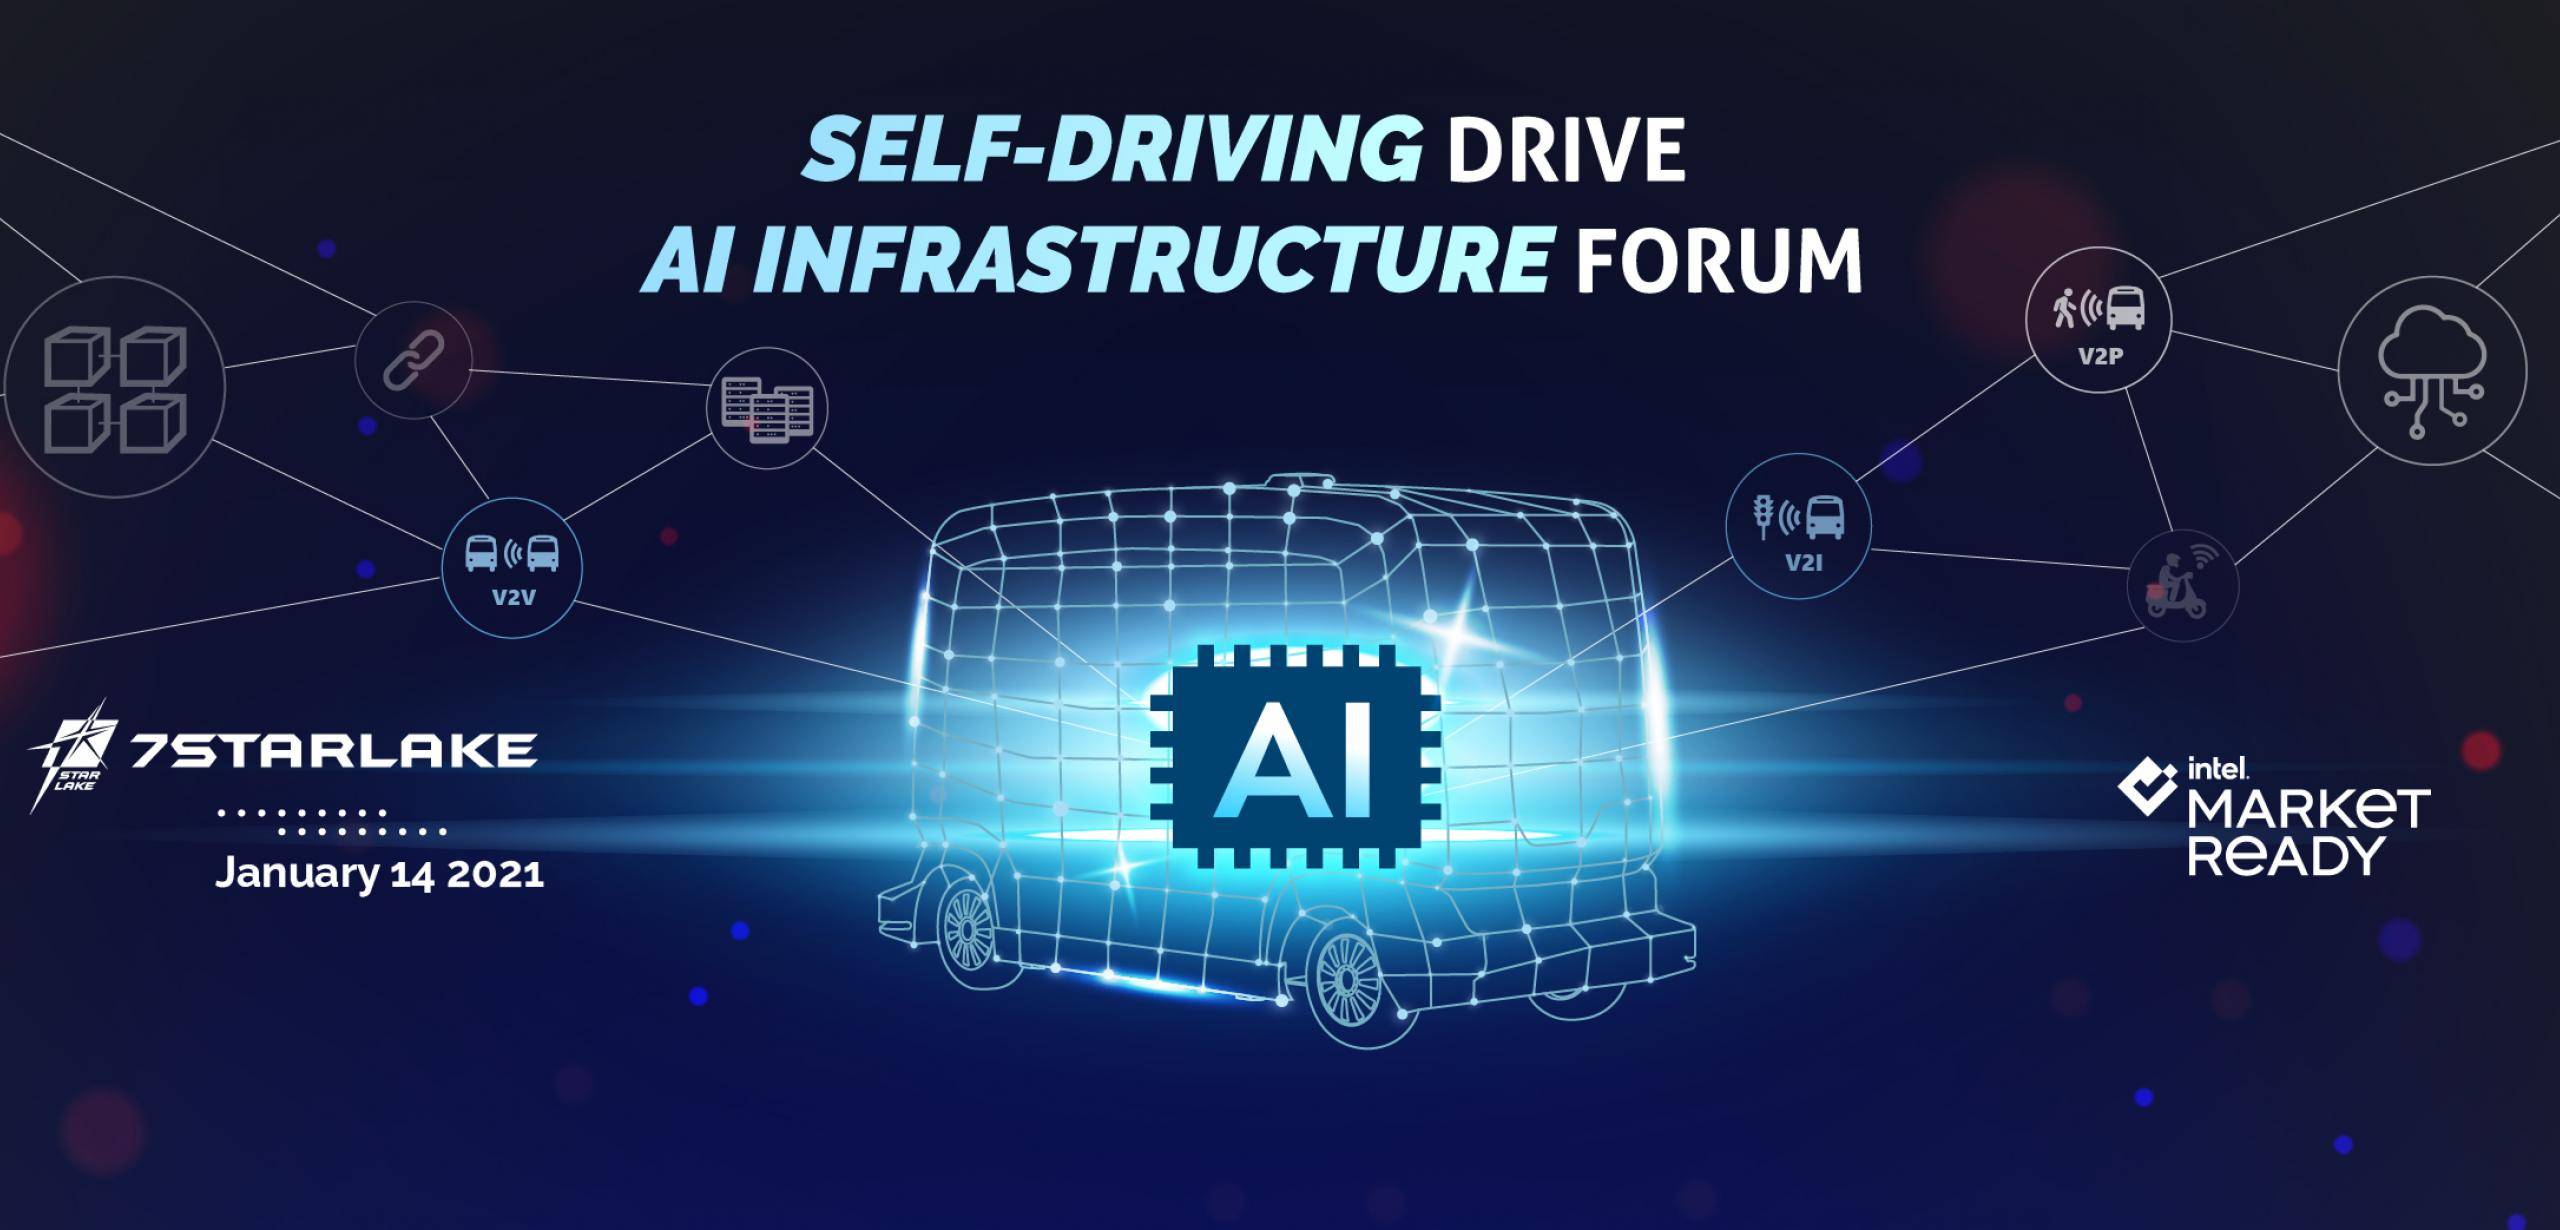 Self-Driving drive AI Infrastructure Forum